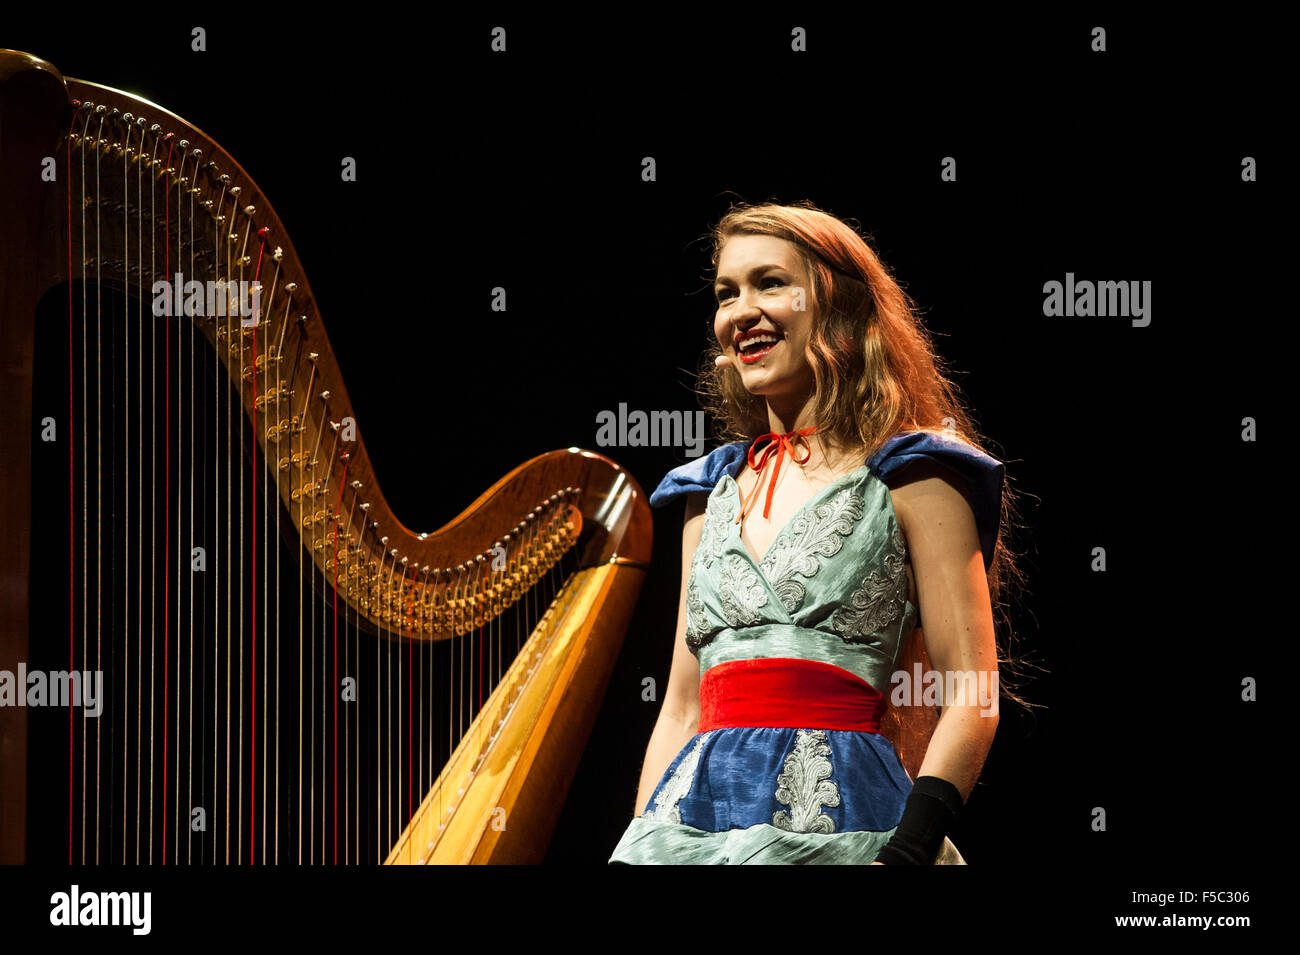 Brighton, UK. 1st November 2015. Joanna Newsom, American singer-songwriter and harpist, performs live at the Brighton Dome in Brighton, England, on her second UK tour date. The tour follows the release of her fourth album - and first in five years - 'Divers', released on 23 October via Drag City. Credit:  Francesca Moore/Alamy Live News Stock Photo